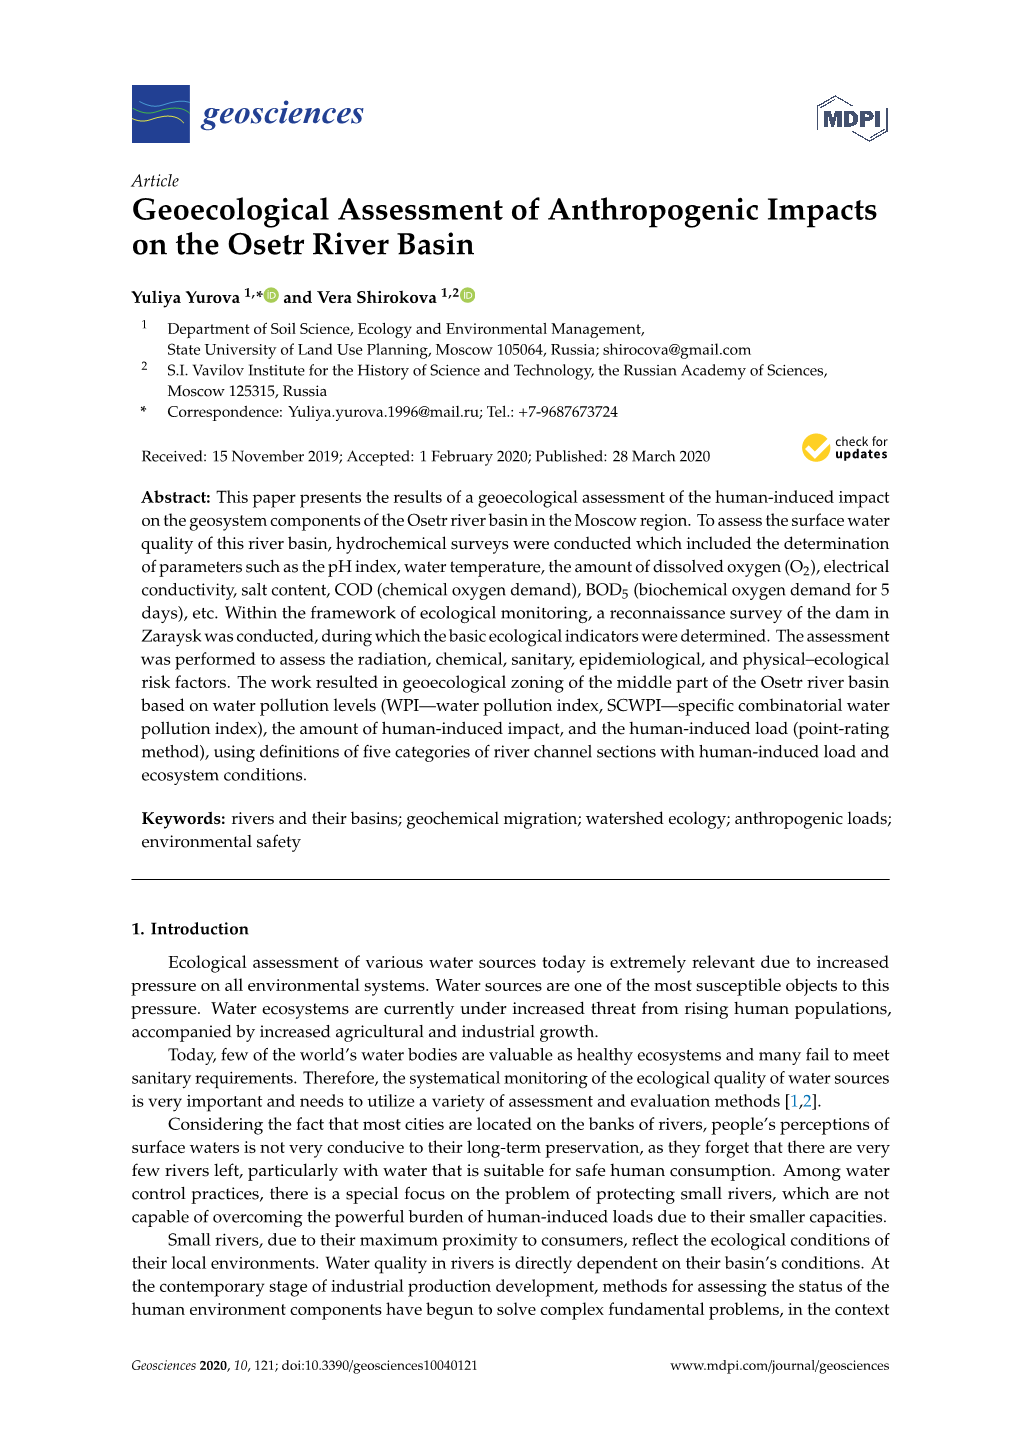 Geoecological Assessment of Anthropogenic Impacts on the Osetr River Basin